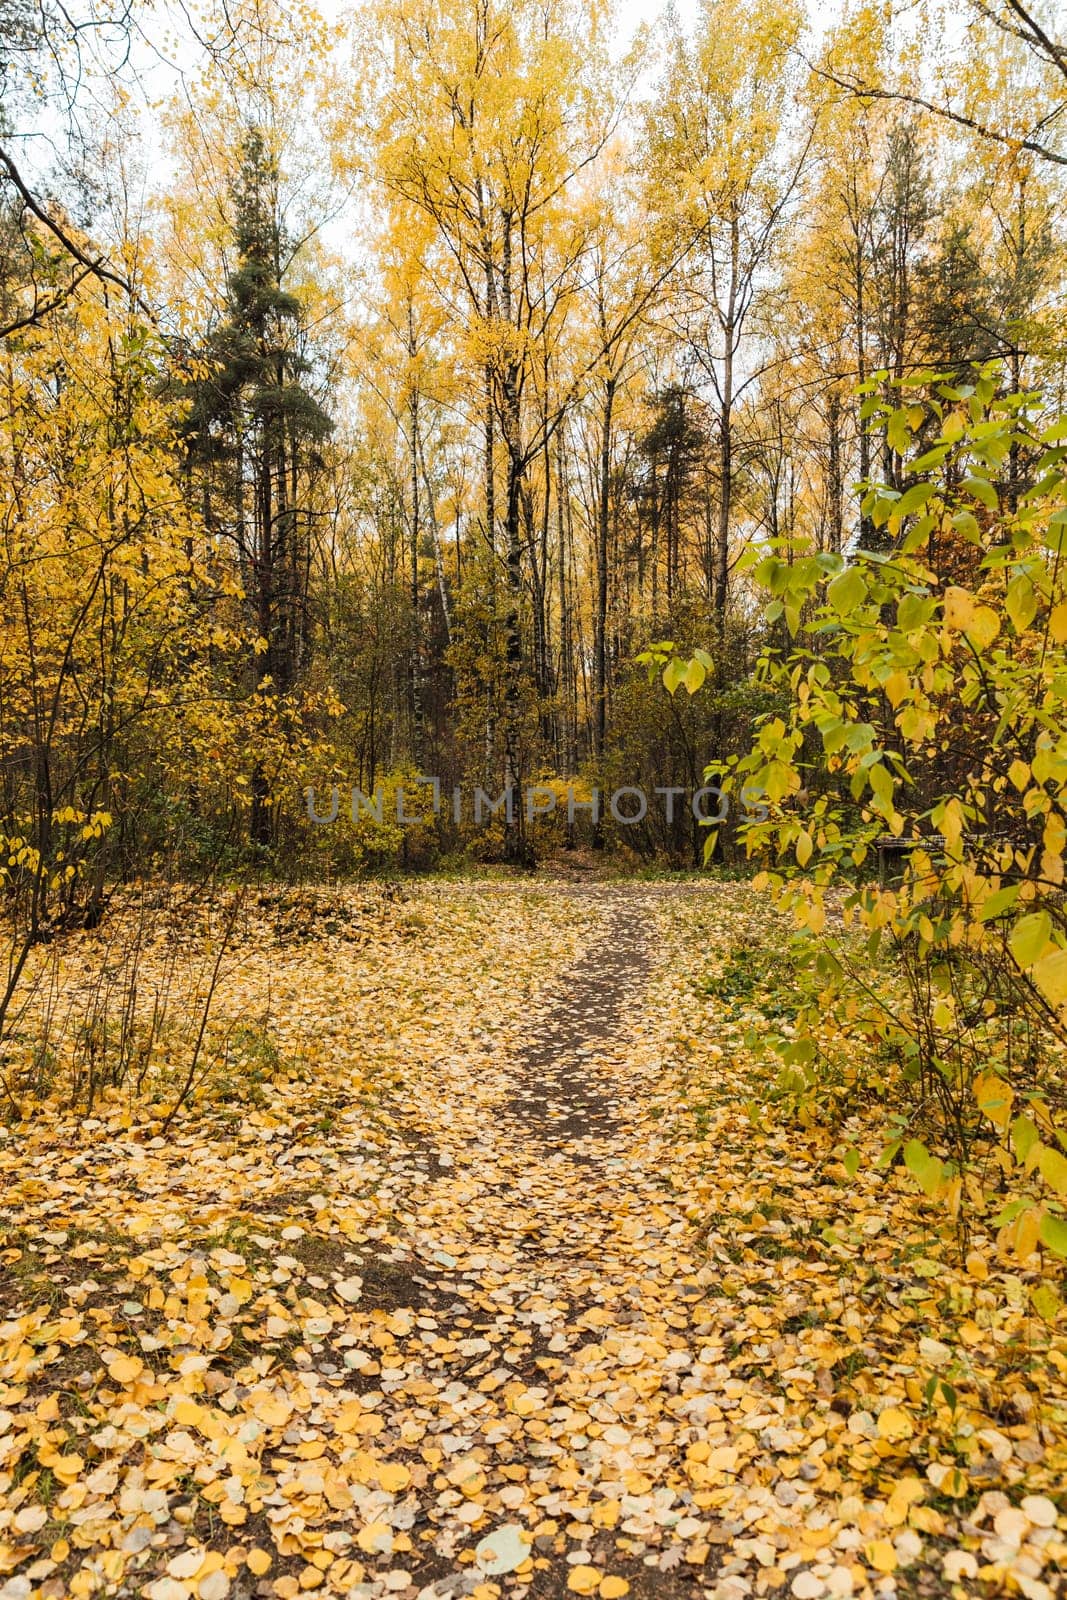 yellow leaves on the ground trees autumn walk nature travel